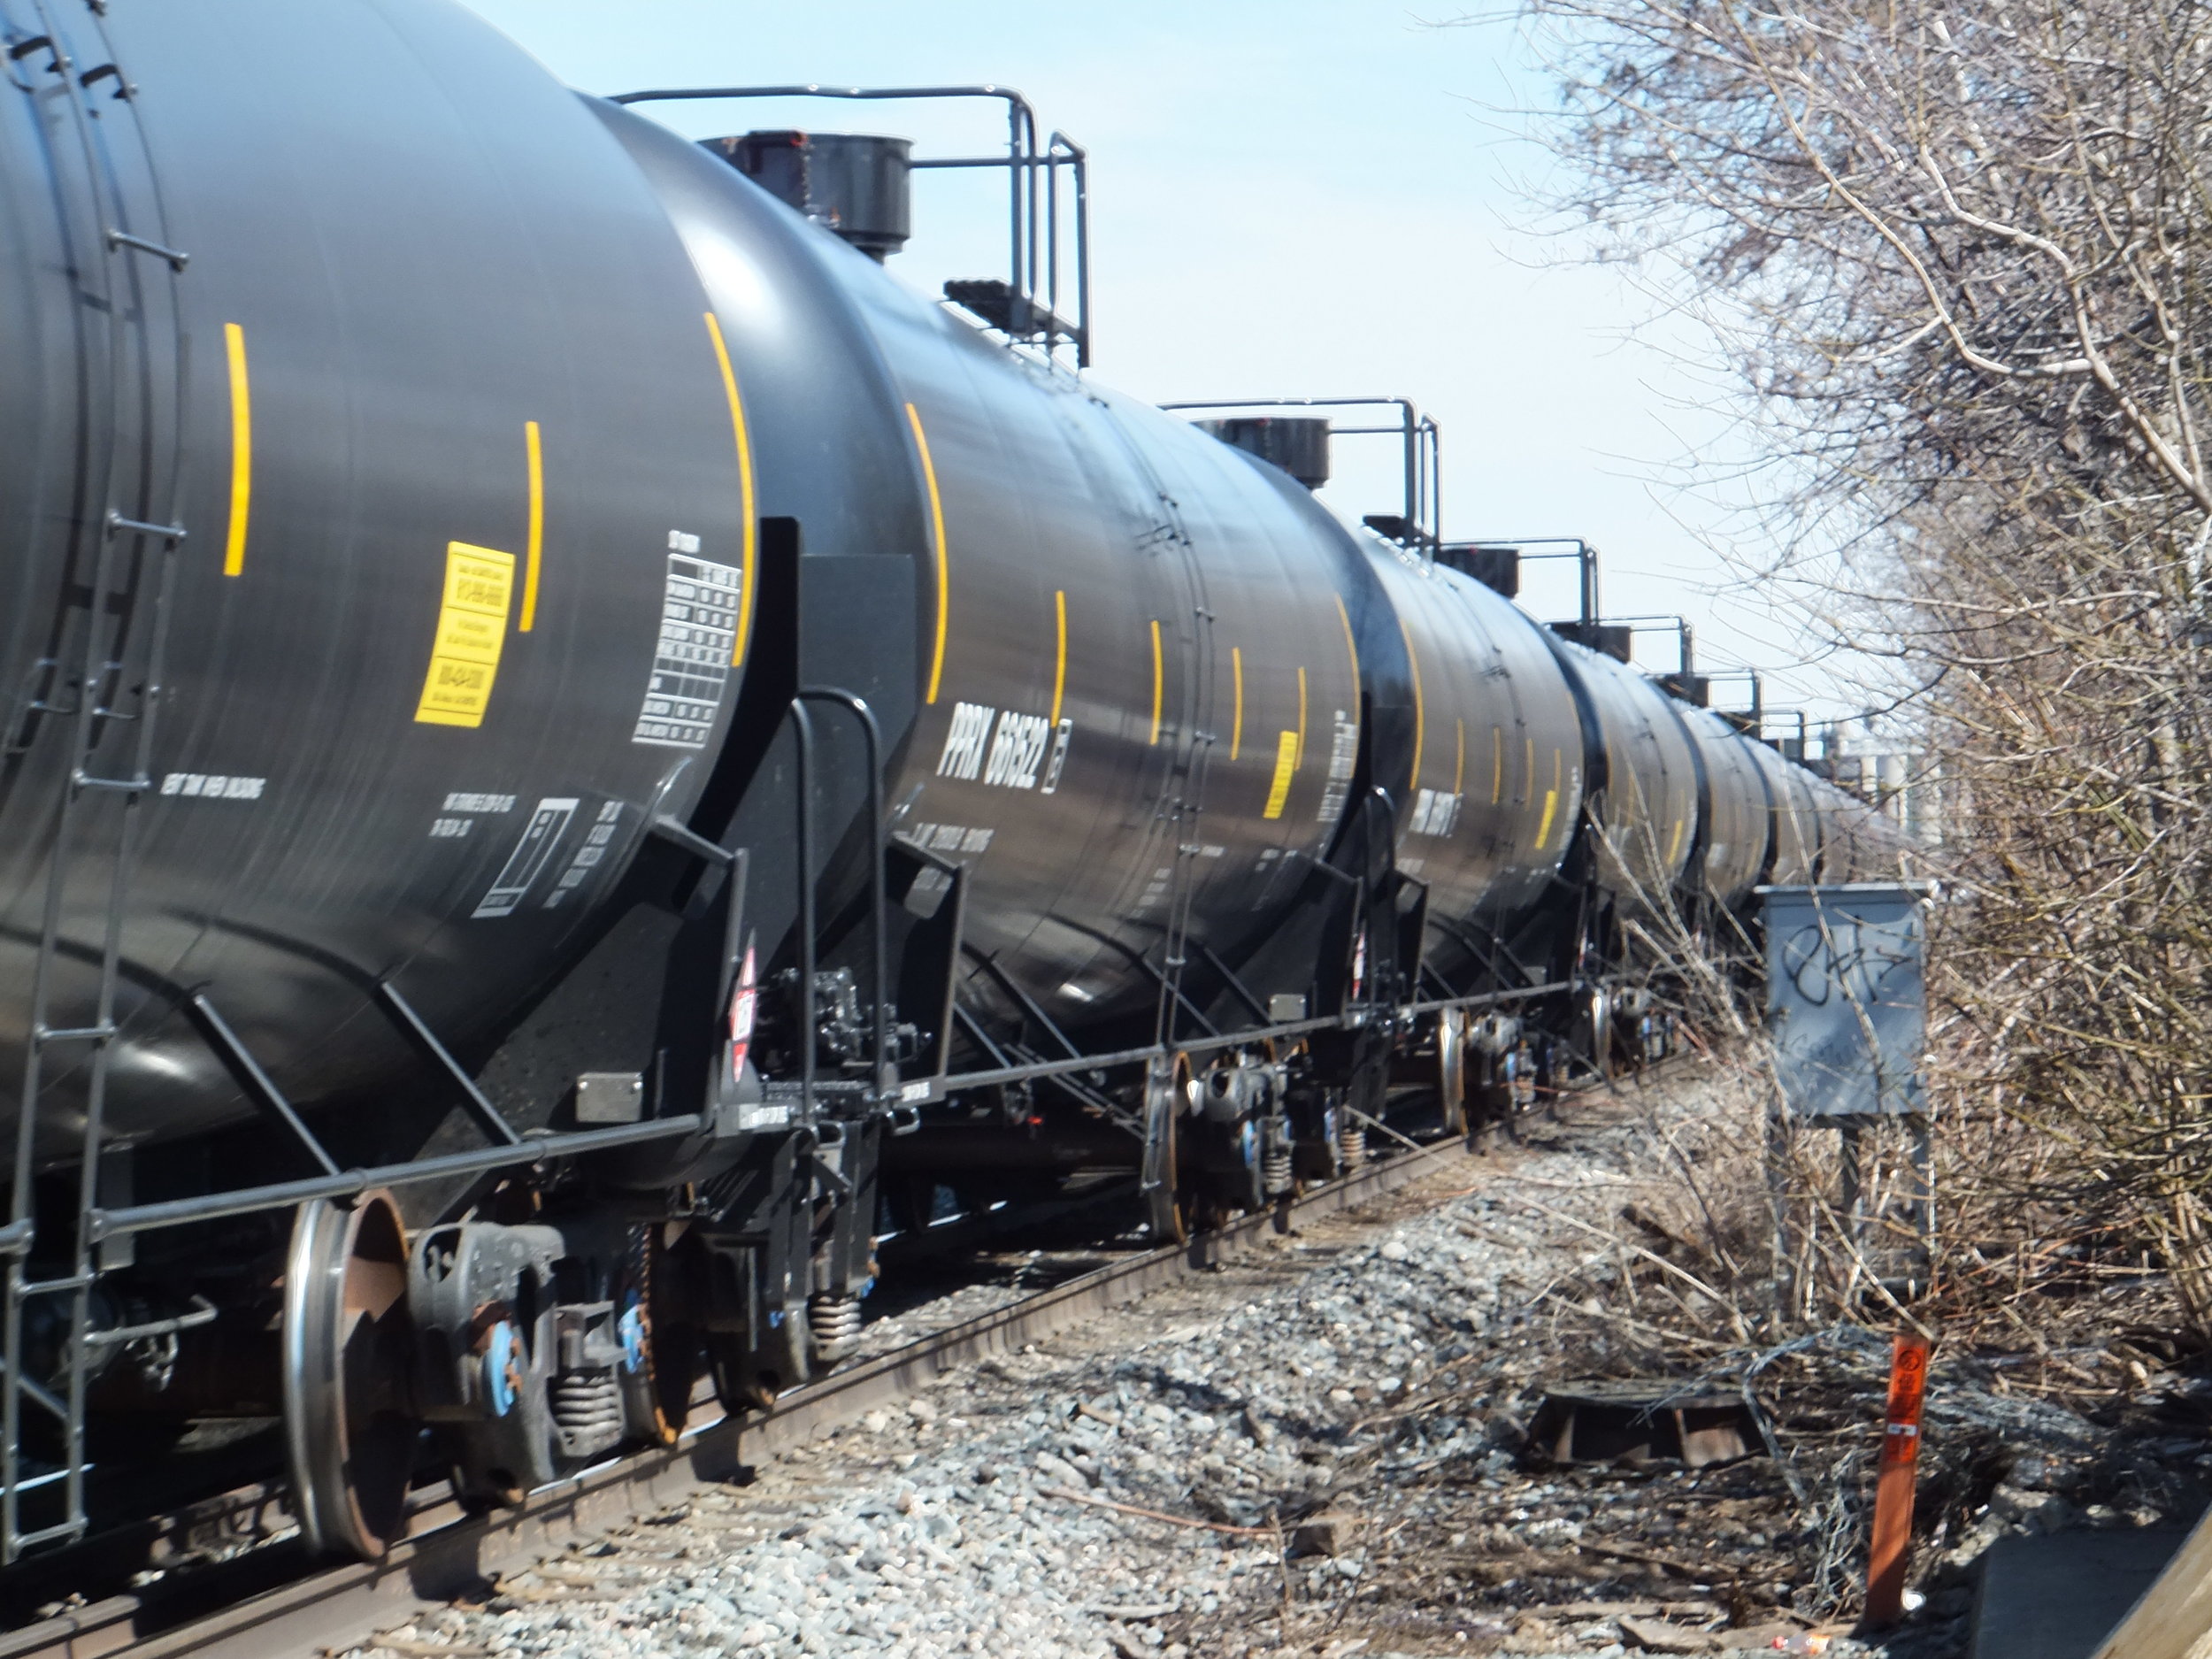 Transportation Safety Board Recommendation and Report on Gogama Derailment (Feb. 14, 2015)